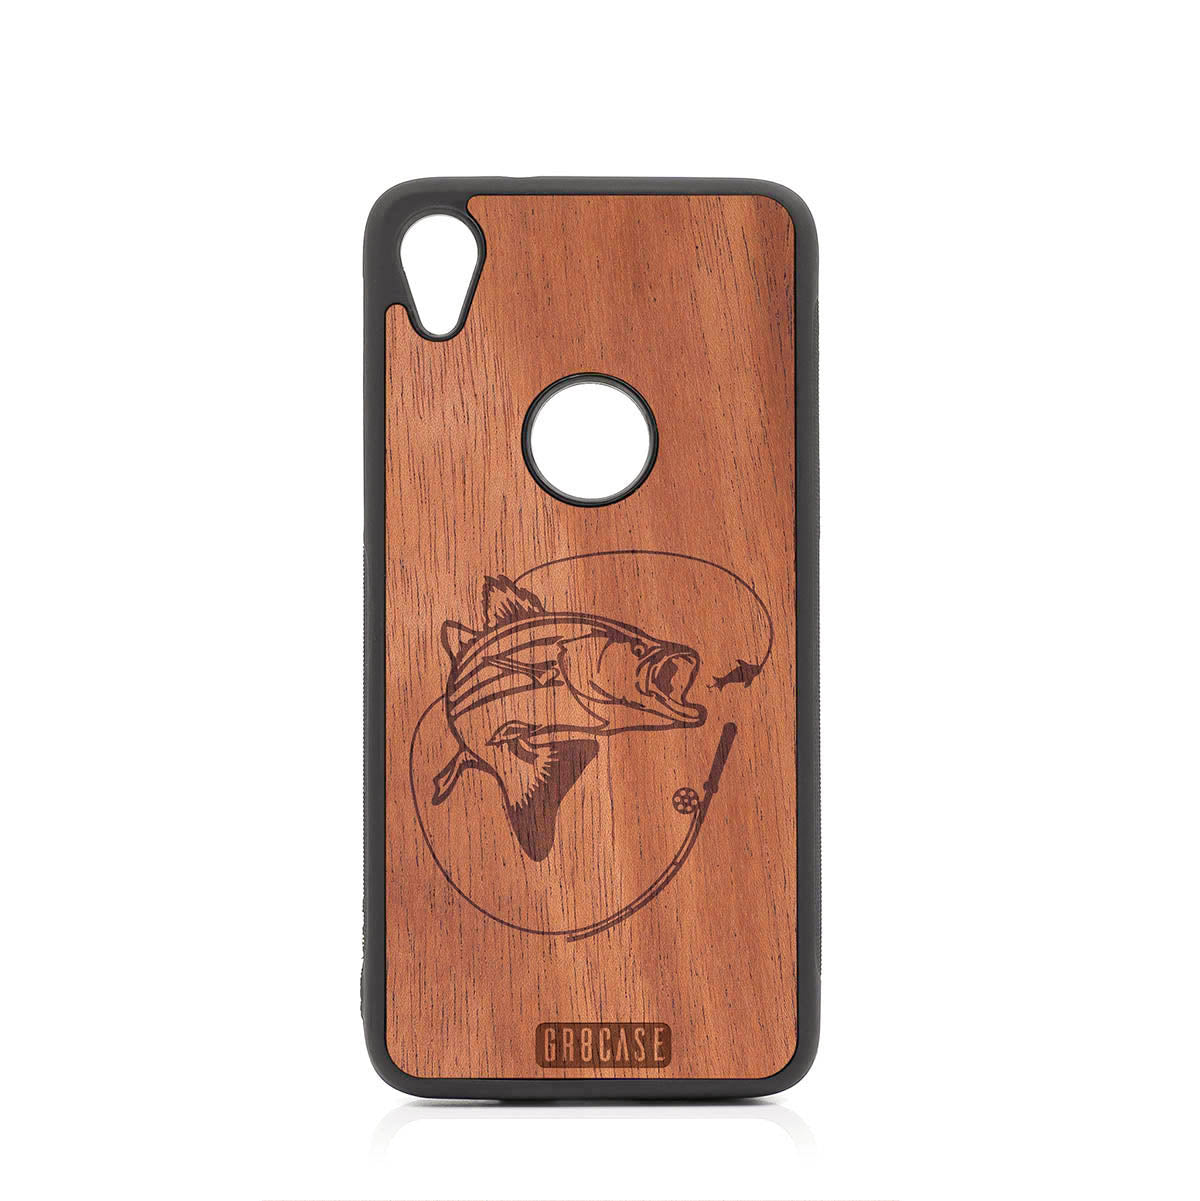 Fish and Reel Design Wood Case For Moto E6 by GR8CASE